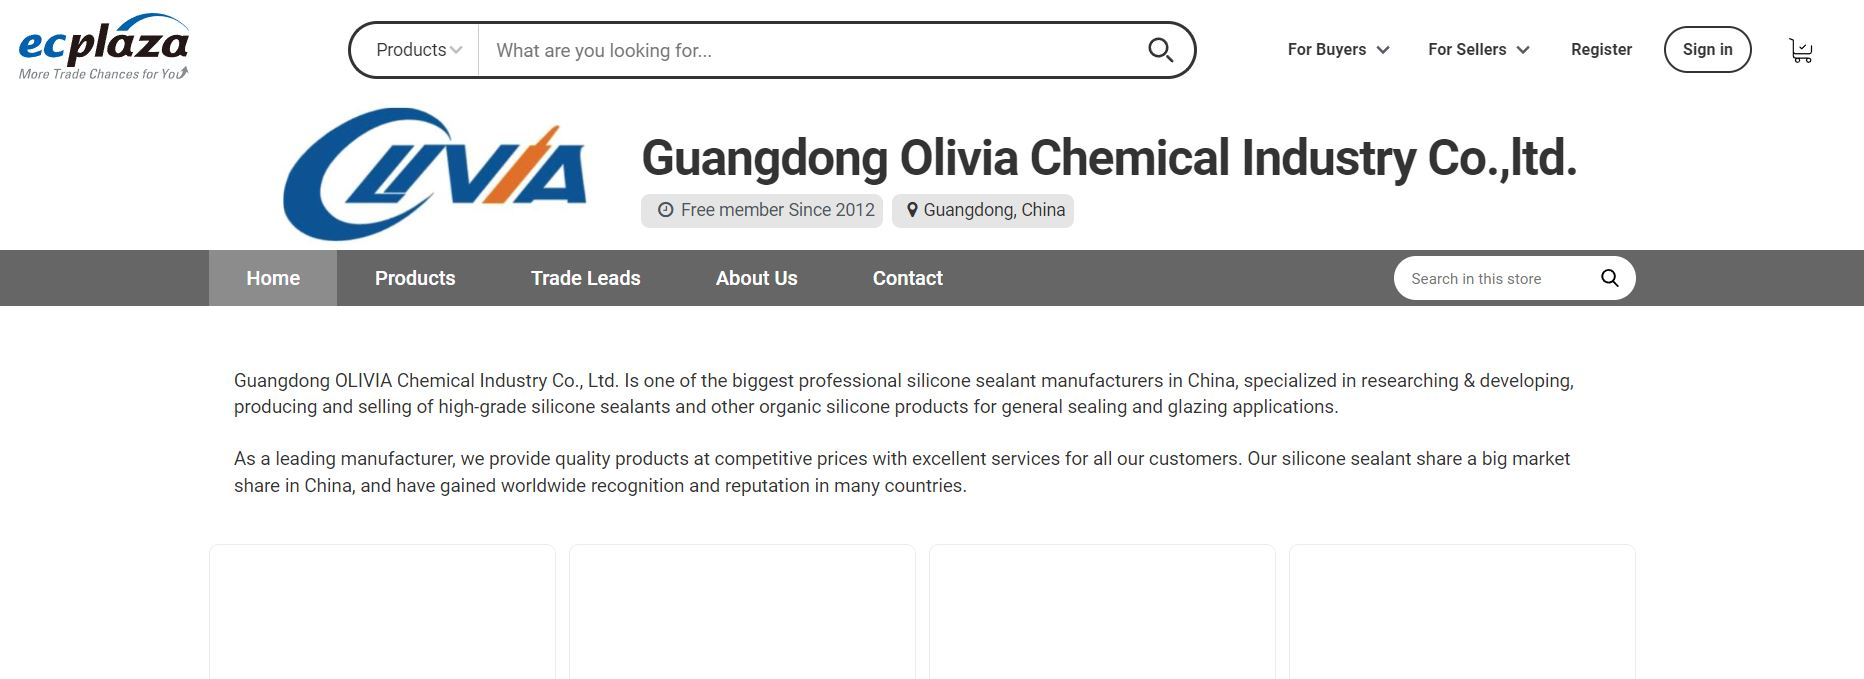 Guangdong Olivia Chemical Industry Co. Limited